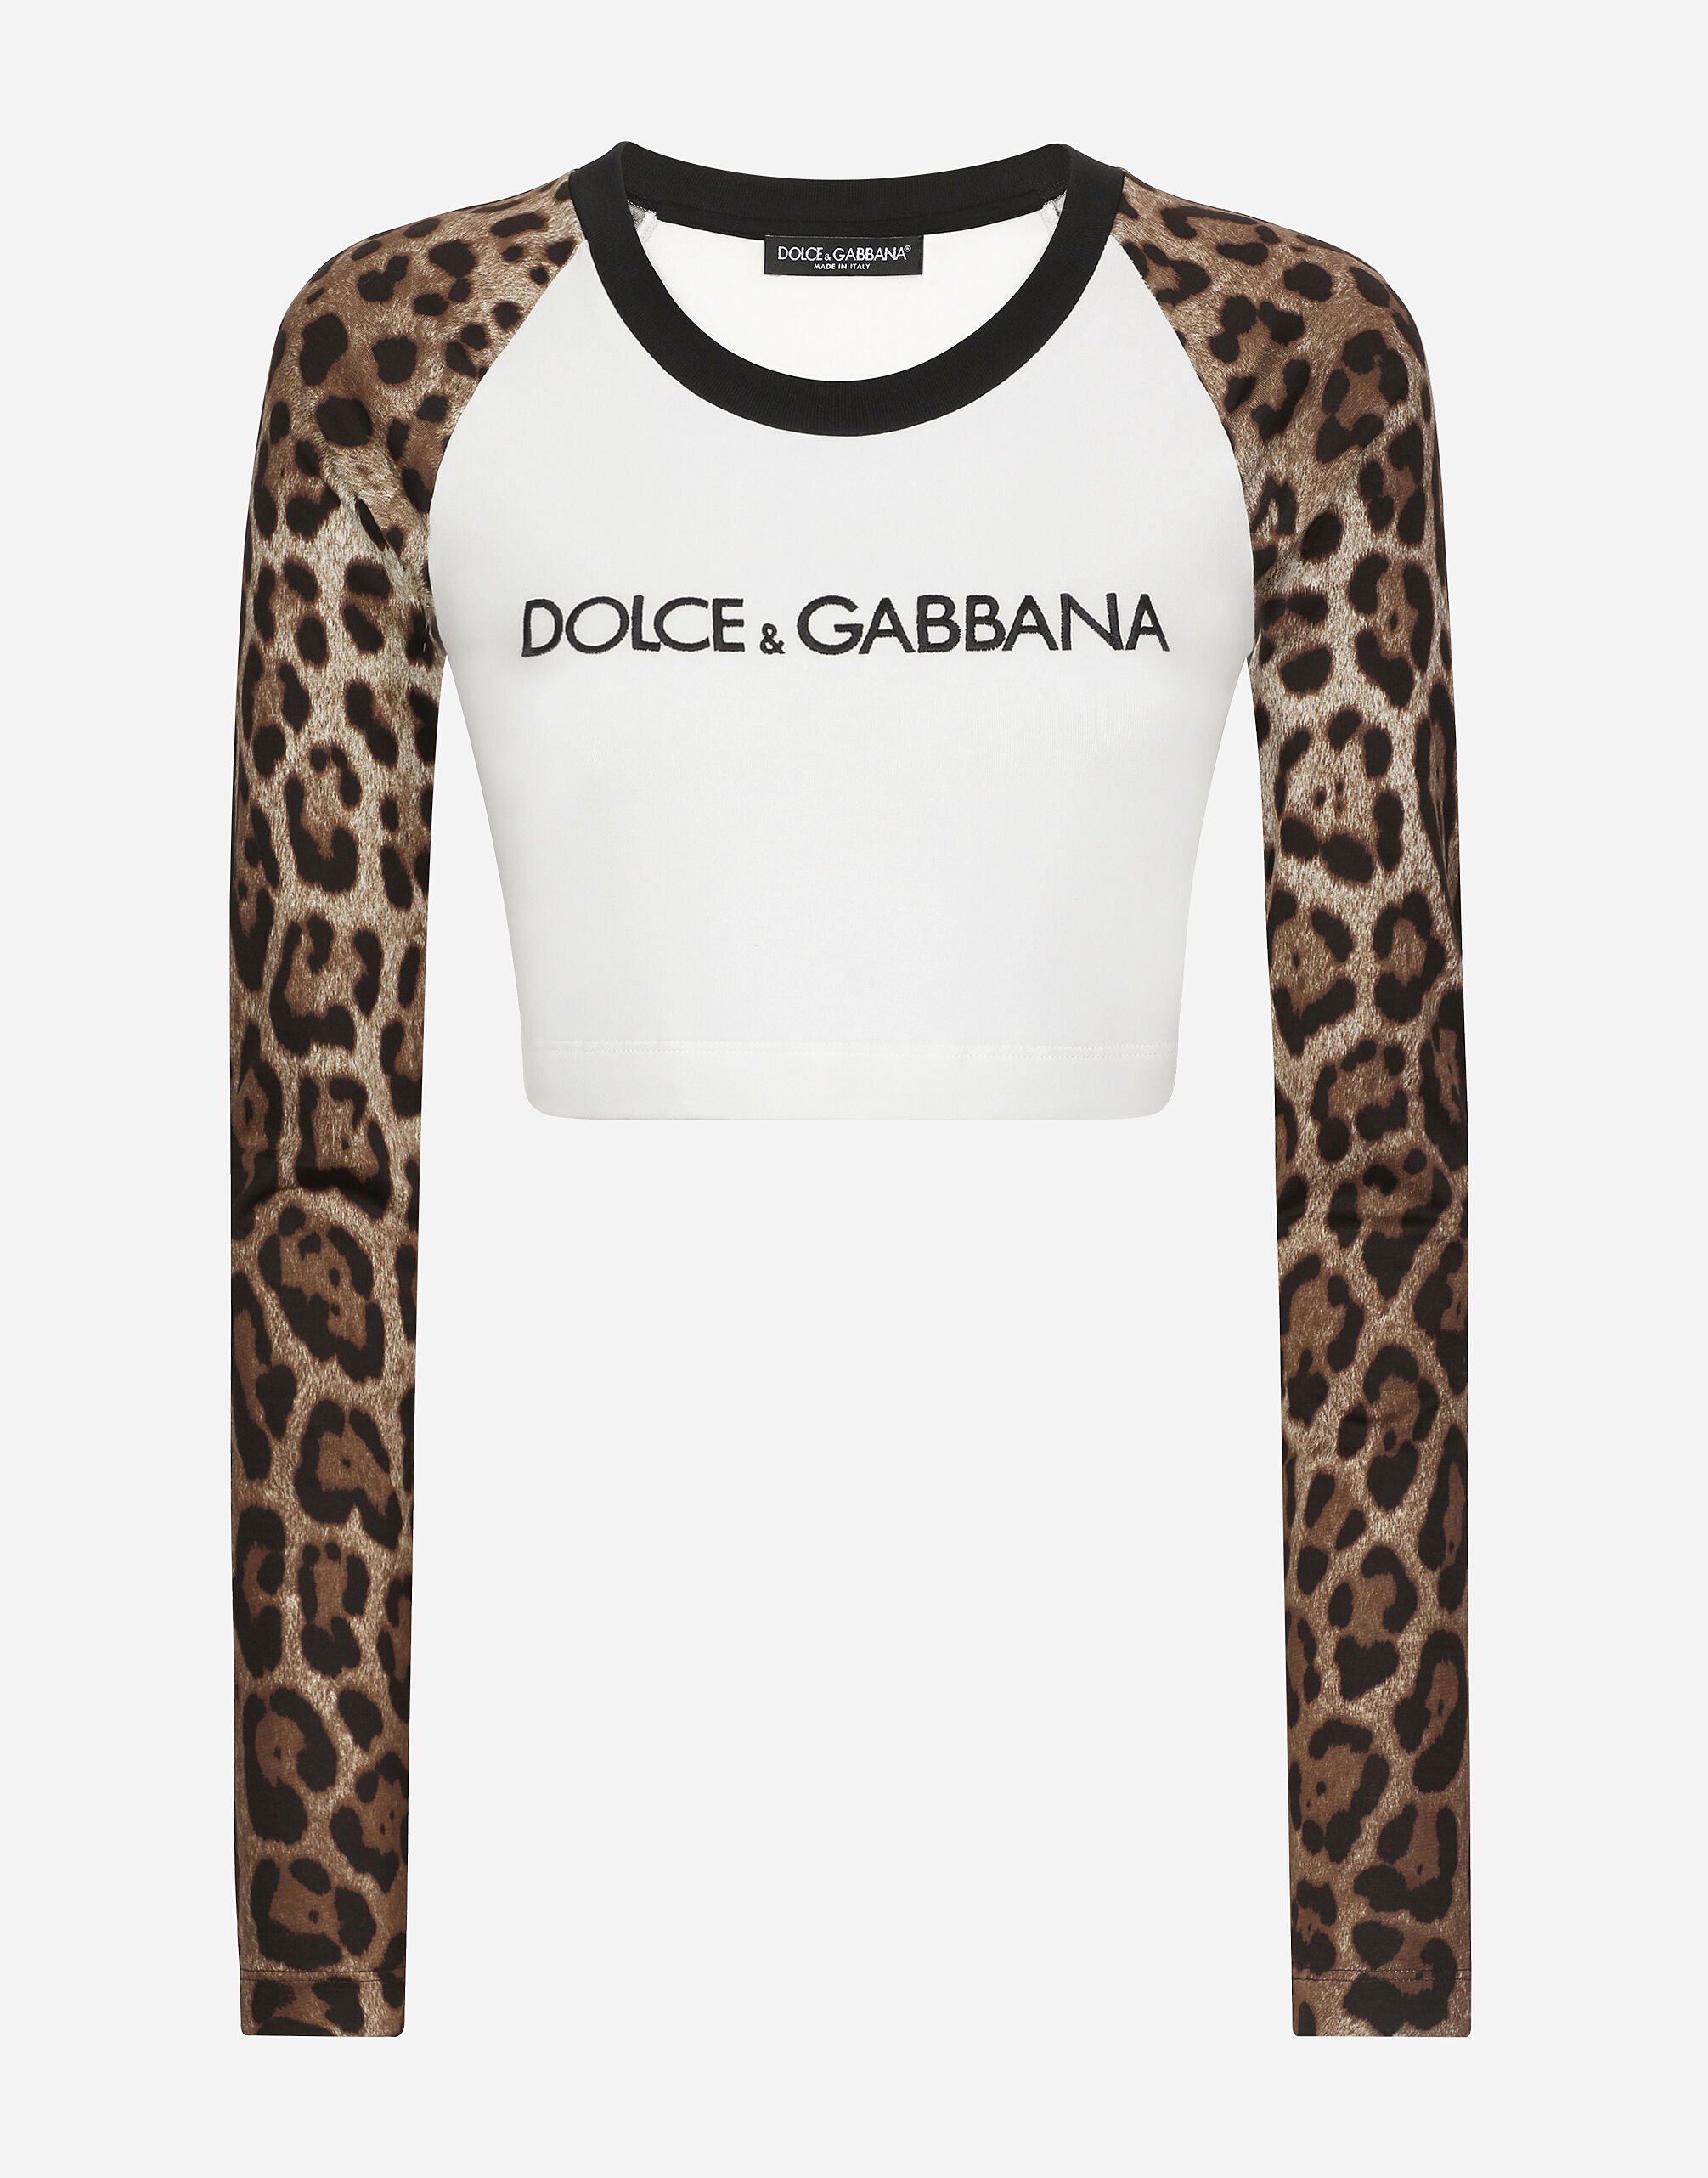 ${brand} Long-sleeved T-shirt with Dolce&Gabbana logo ${colorDescription} ${masterID}